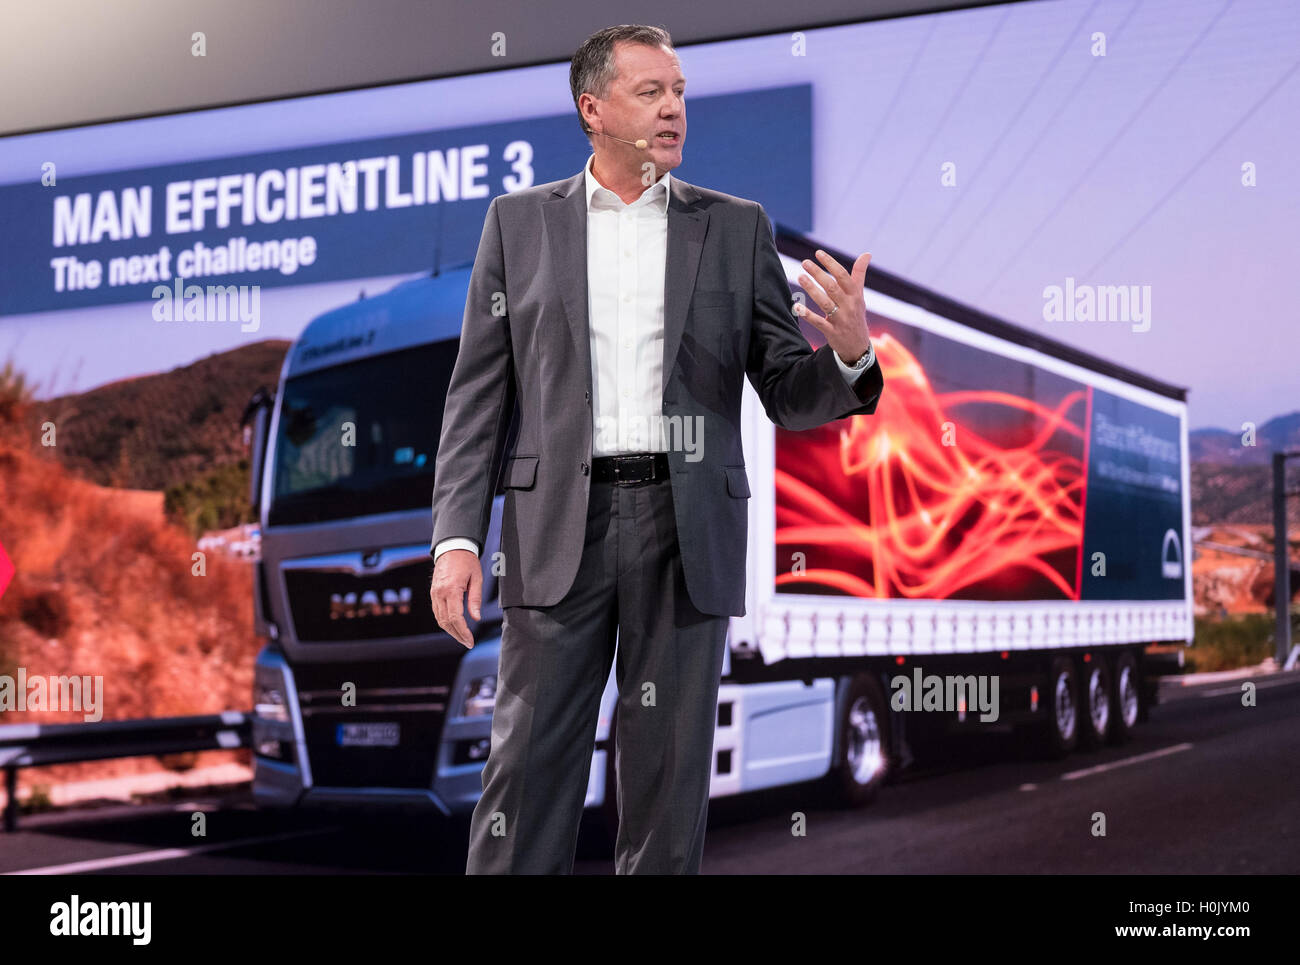 Hanover, Germany. 21st Sep, 2016. MAN marketing director Heinz-Juergen Loew speaks at the MAN stand at the 66th IAA Commerical Vehicles trade fair in Hanover, Germany, 21 September 2016. Around 2,000 exhibitors from 52 countries are presenting alternative engines, autonomous cars, and networked vehicles from 22 to 29 September at the leading trade fair for commercial vehicles. Photo: PETER STEFFEN/dpa/Alamy Live News Stock Photo